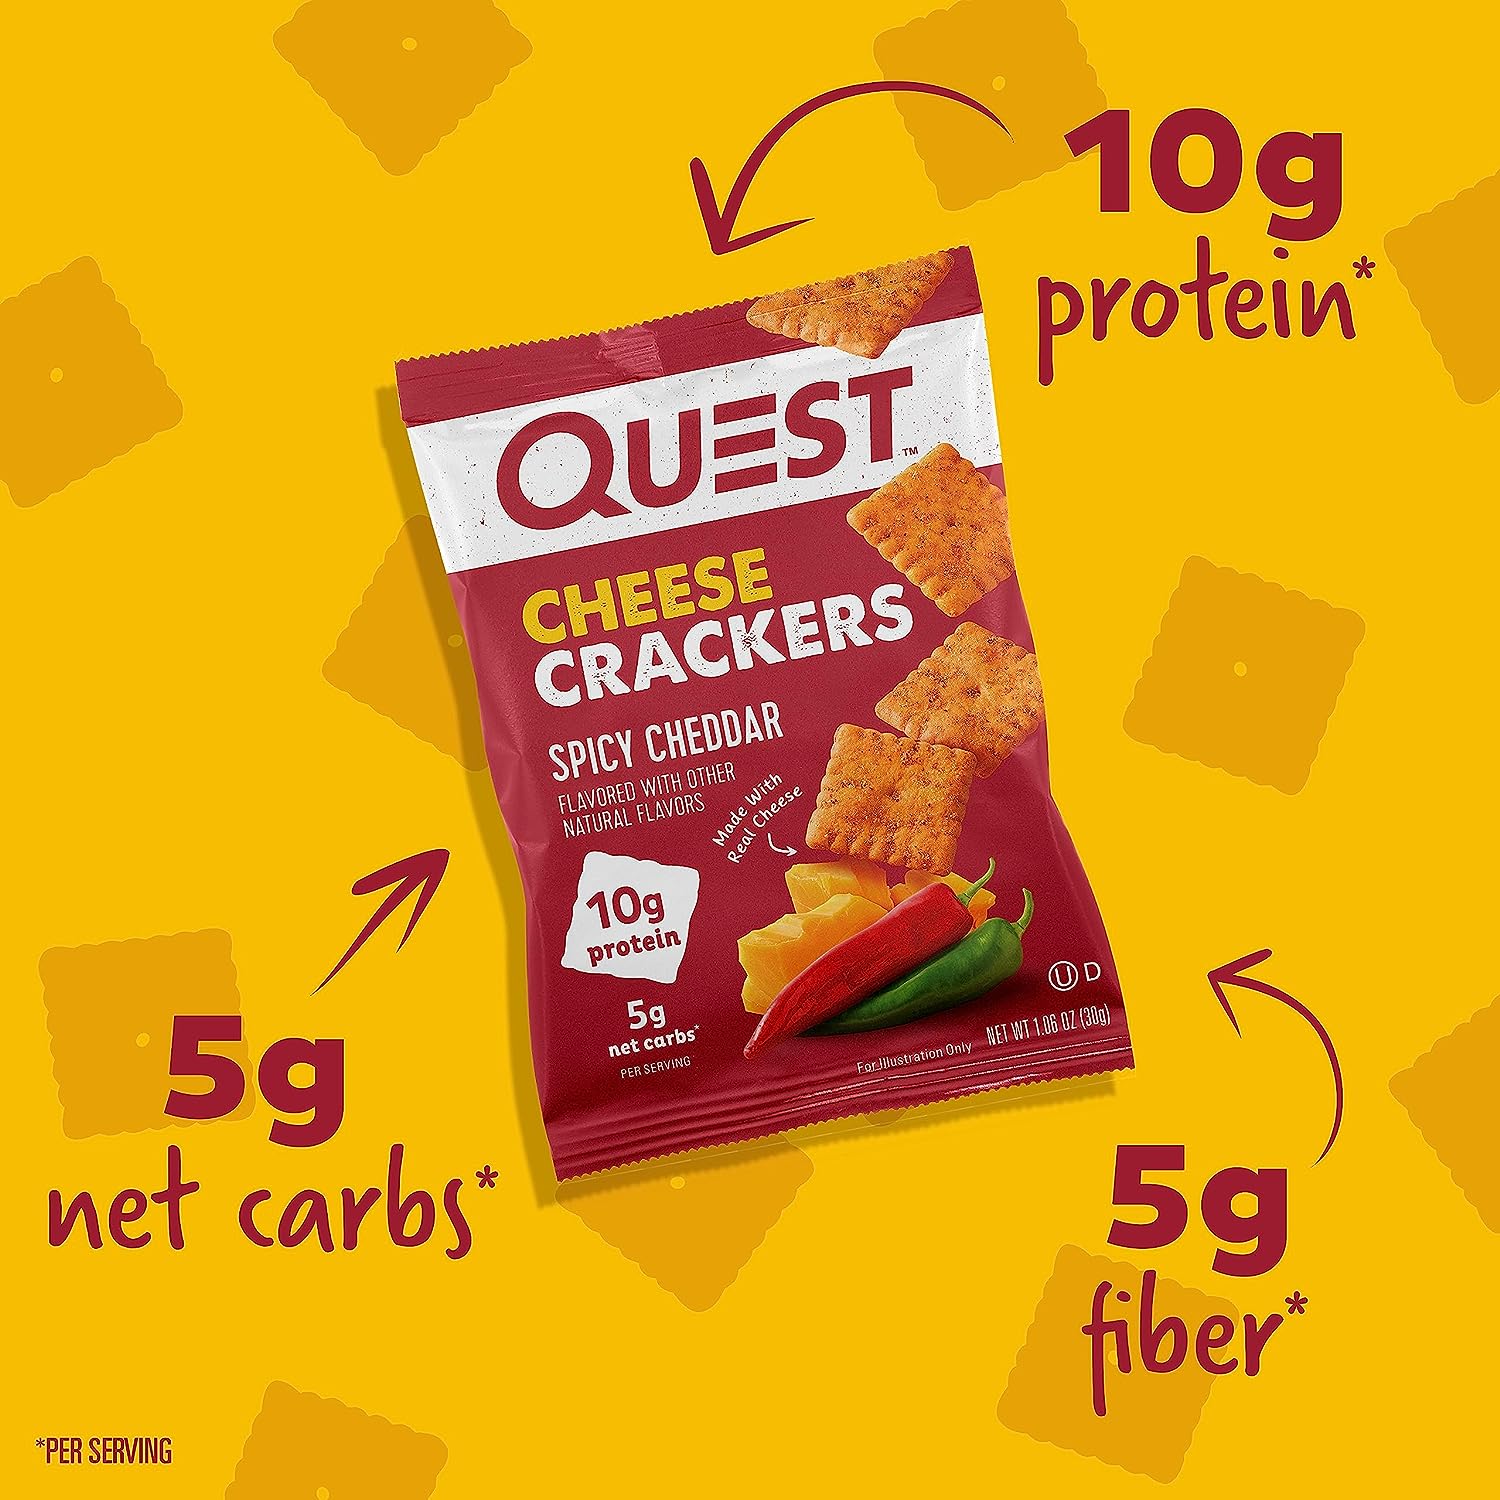 Quest Nutrition Cheese Crackers, Spicy Cheddar Blast, 10g of Protein, Low Carb, Made with Real Cheese, 12 Count (1.06 oz bags)